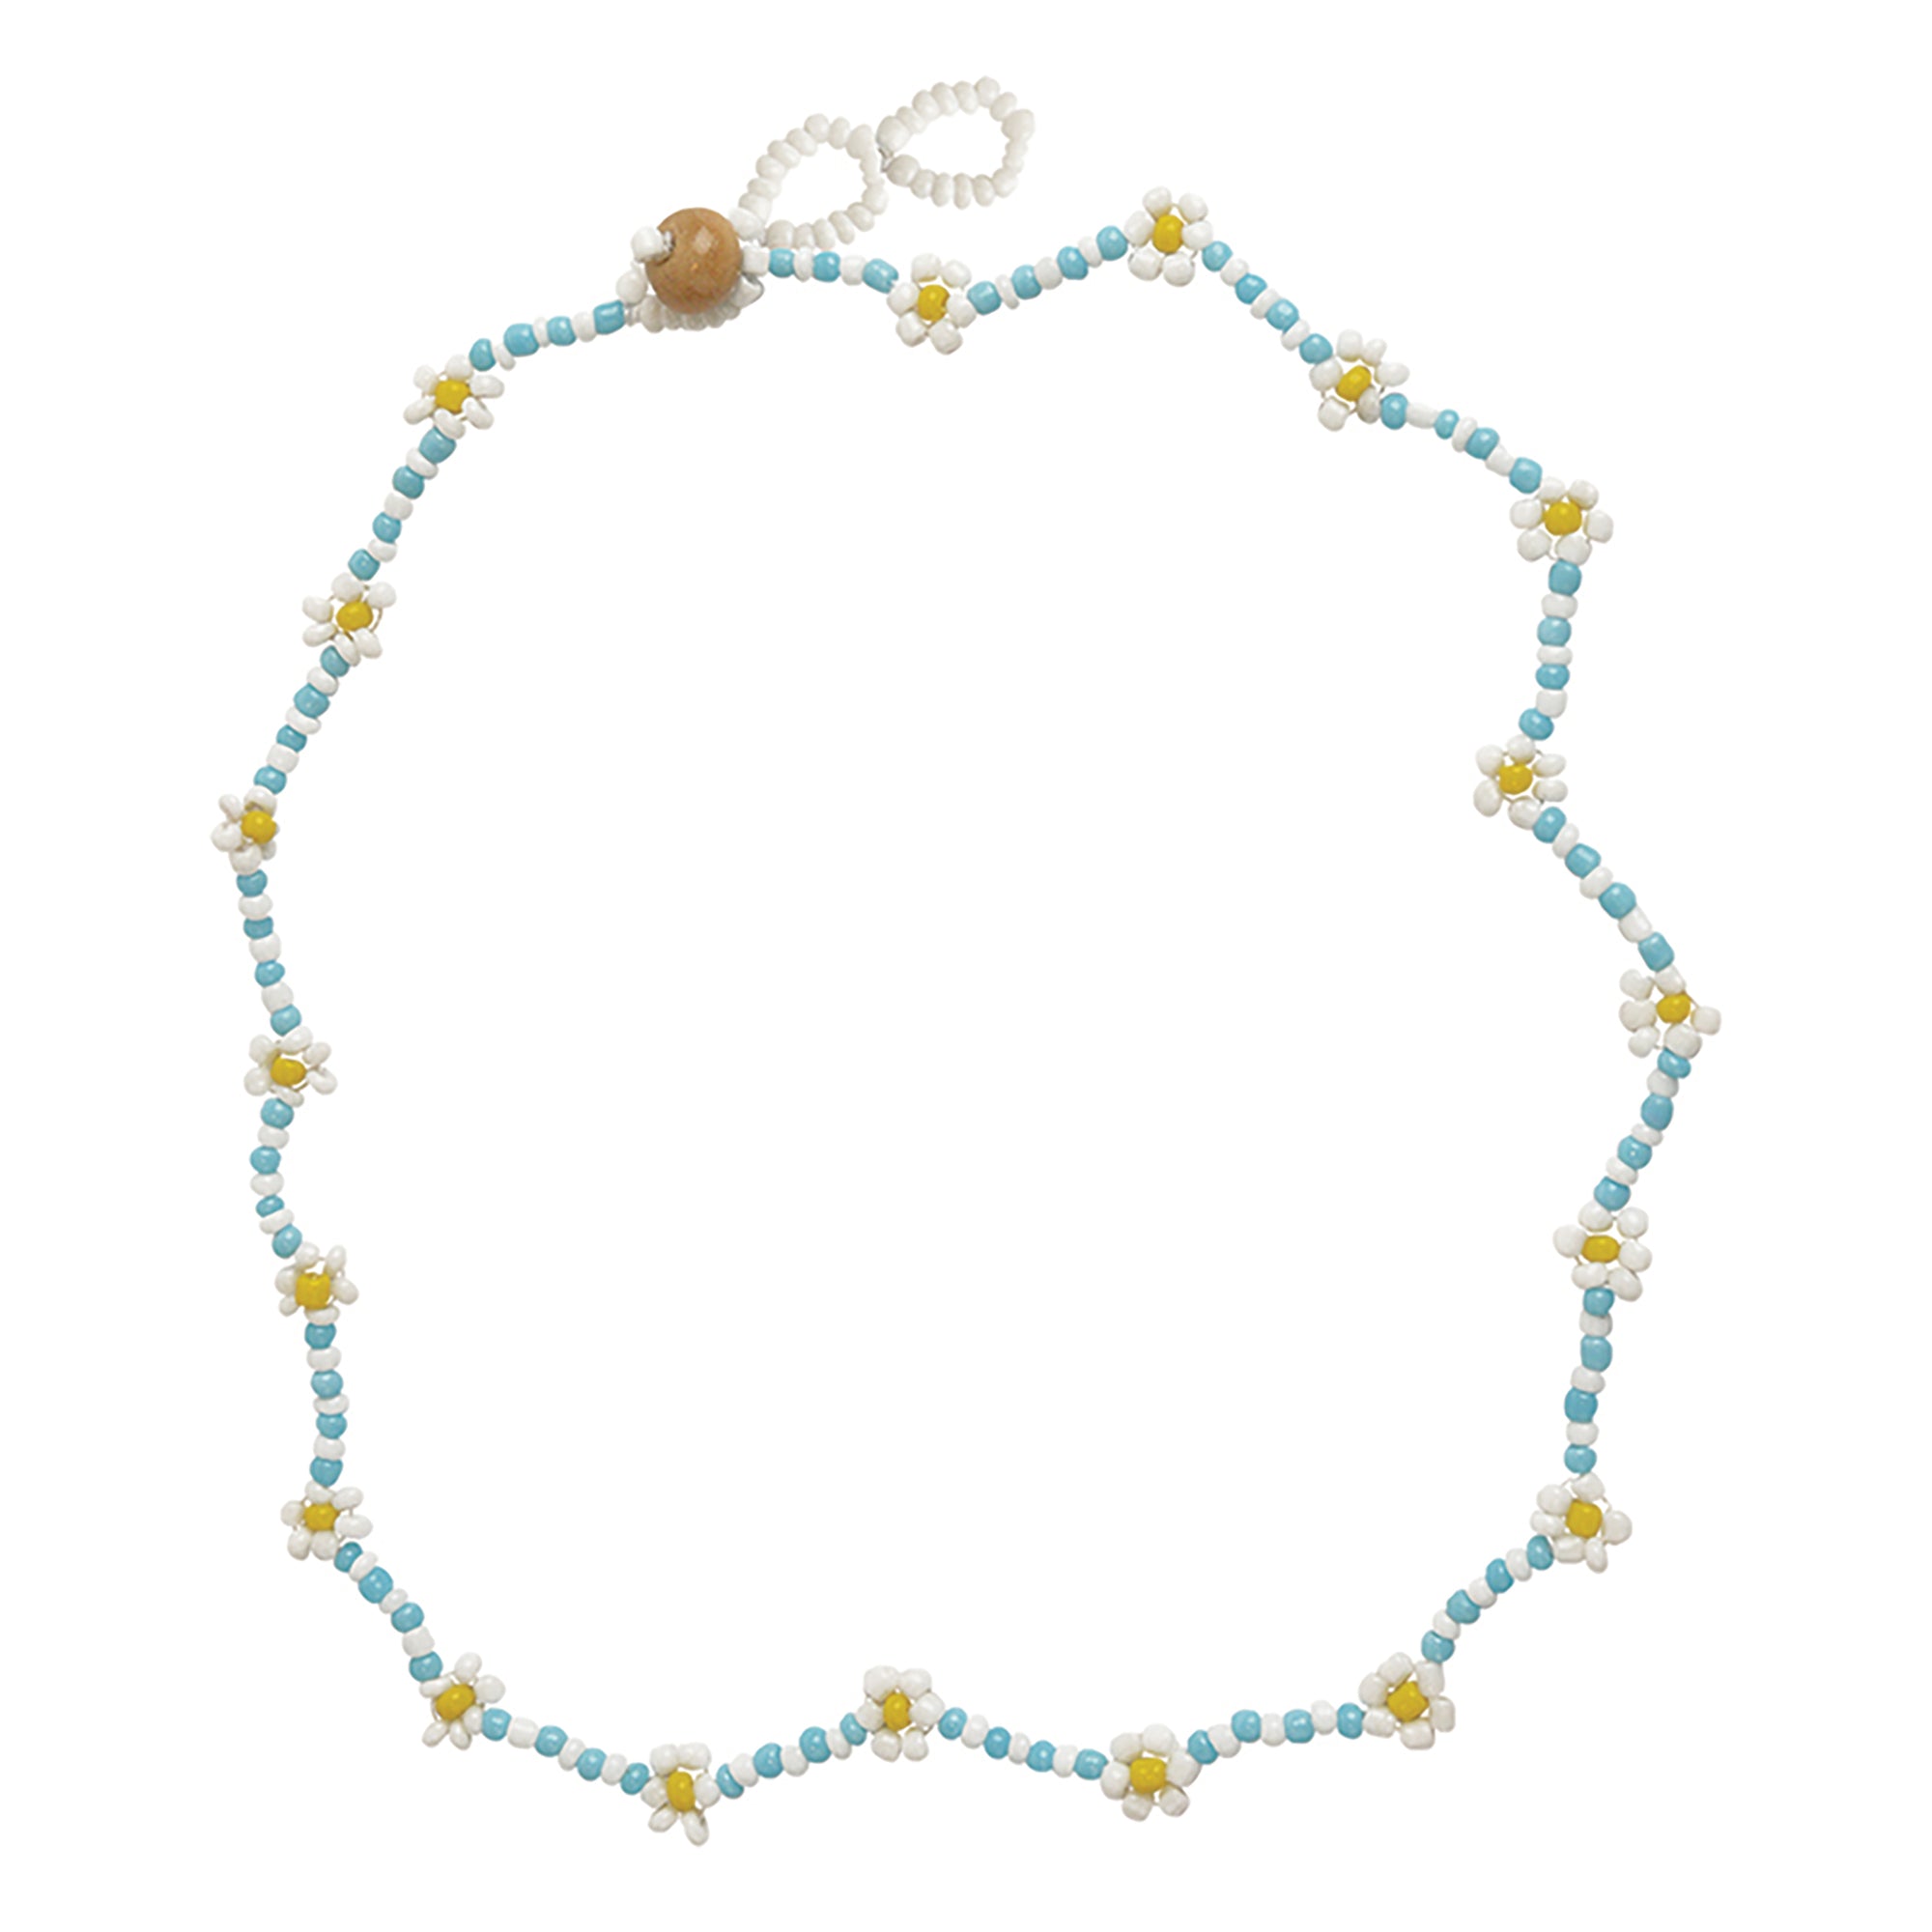 Carazocolla + Turquoise Seed Bead Daisy Chain Necklace